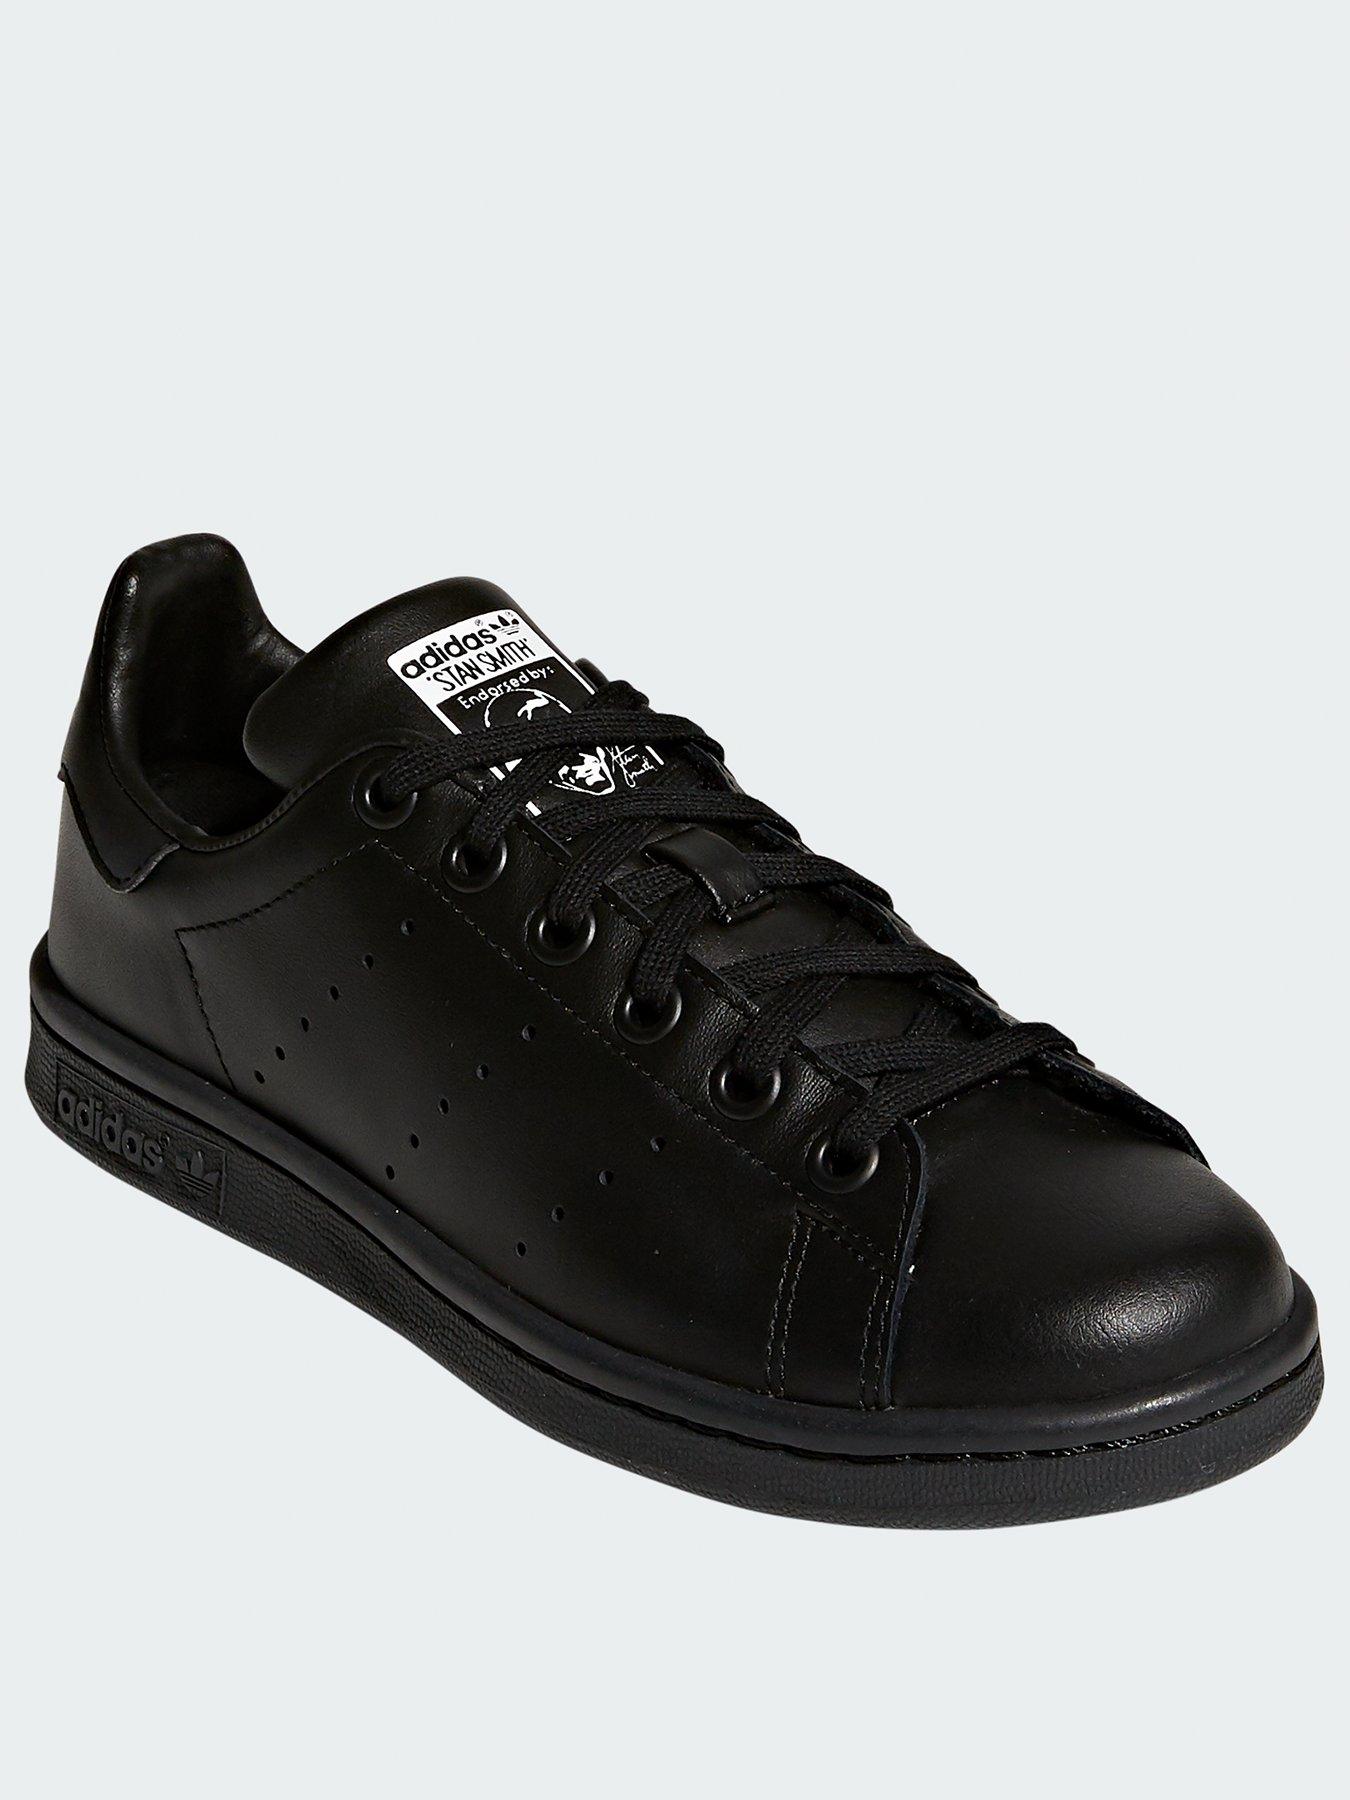 stan smith trainers size 3